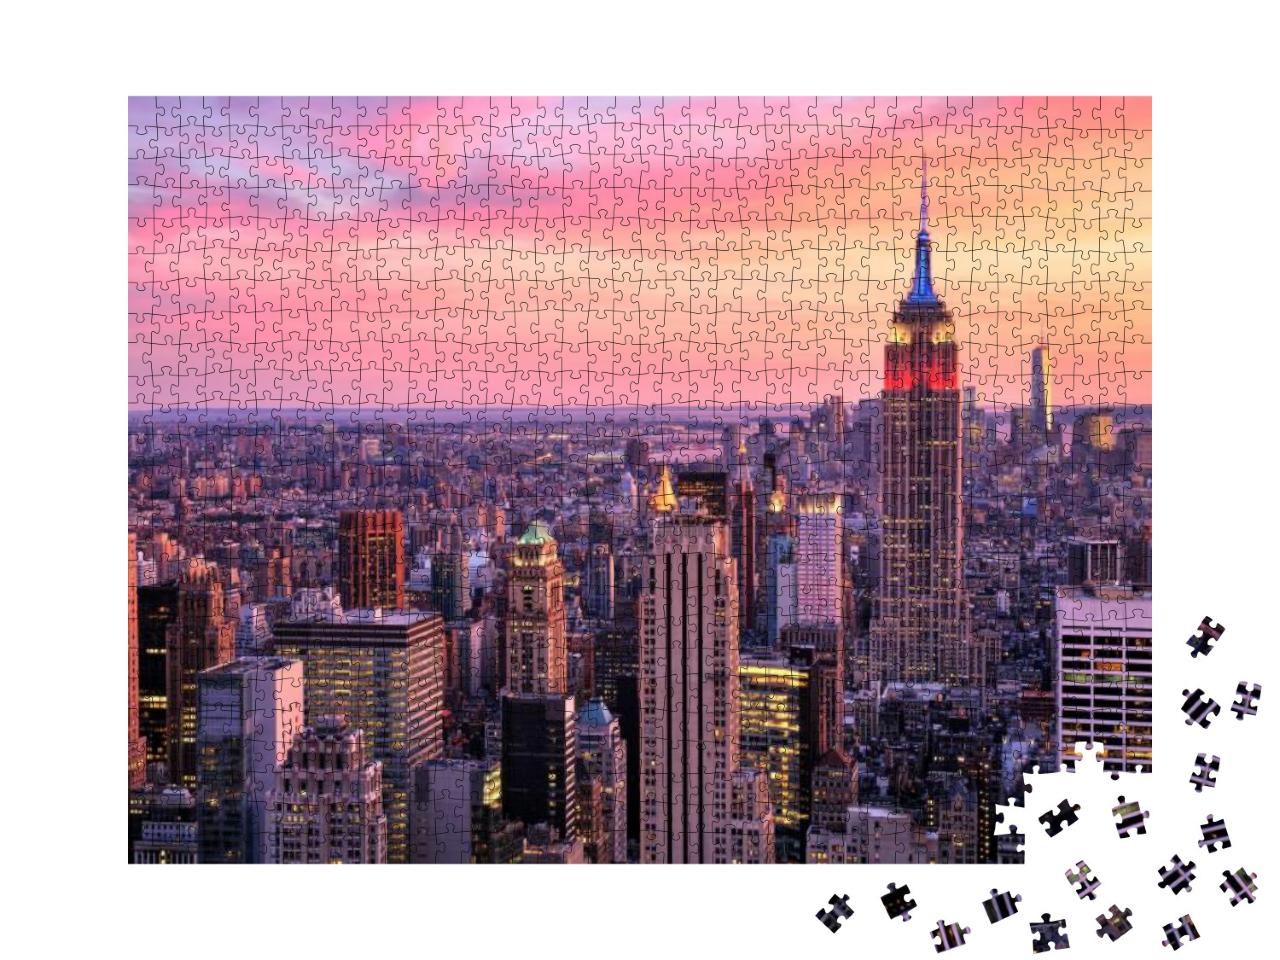 Puzzle 1000 Teile „New York City: Midtown mit Empire State Building“